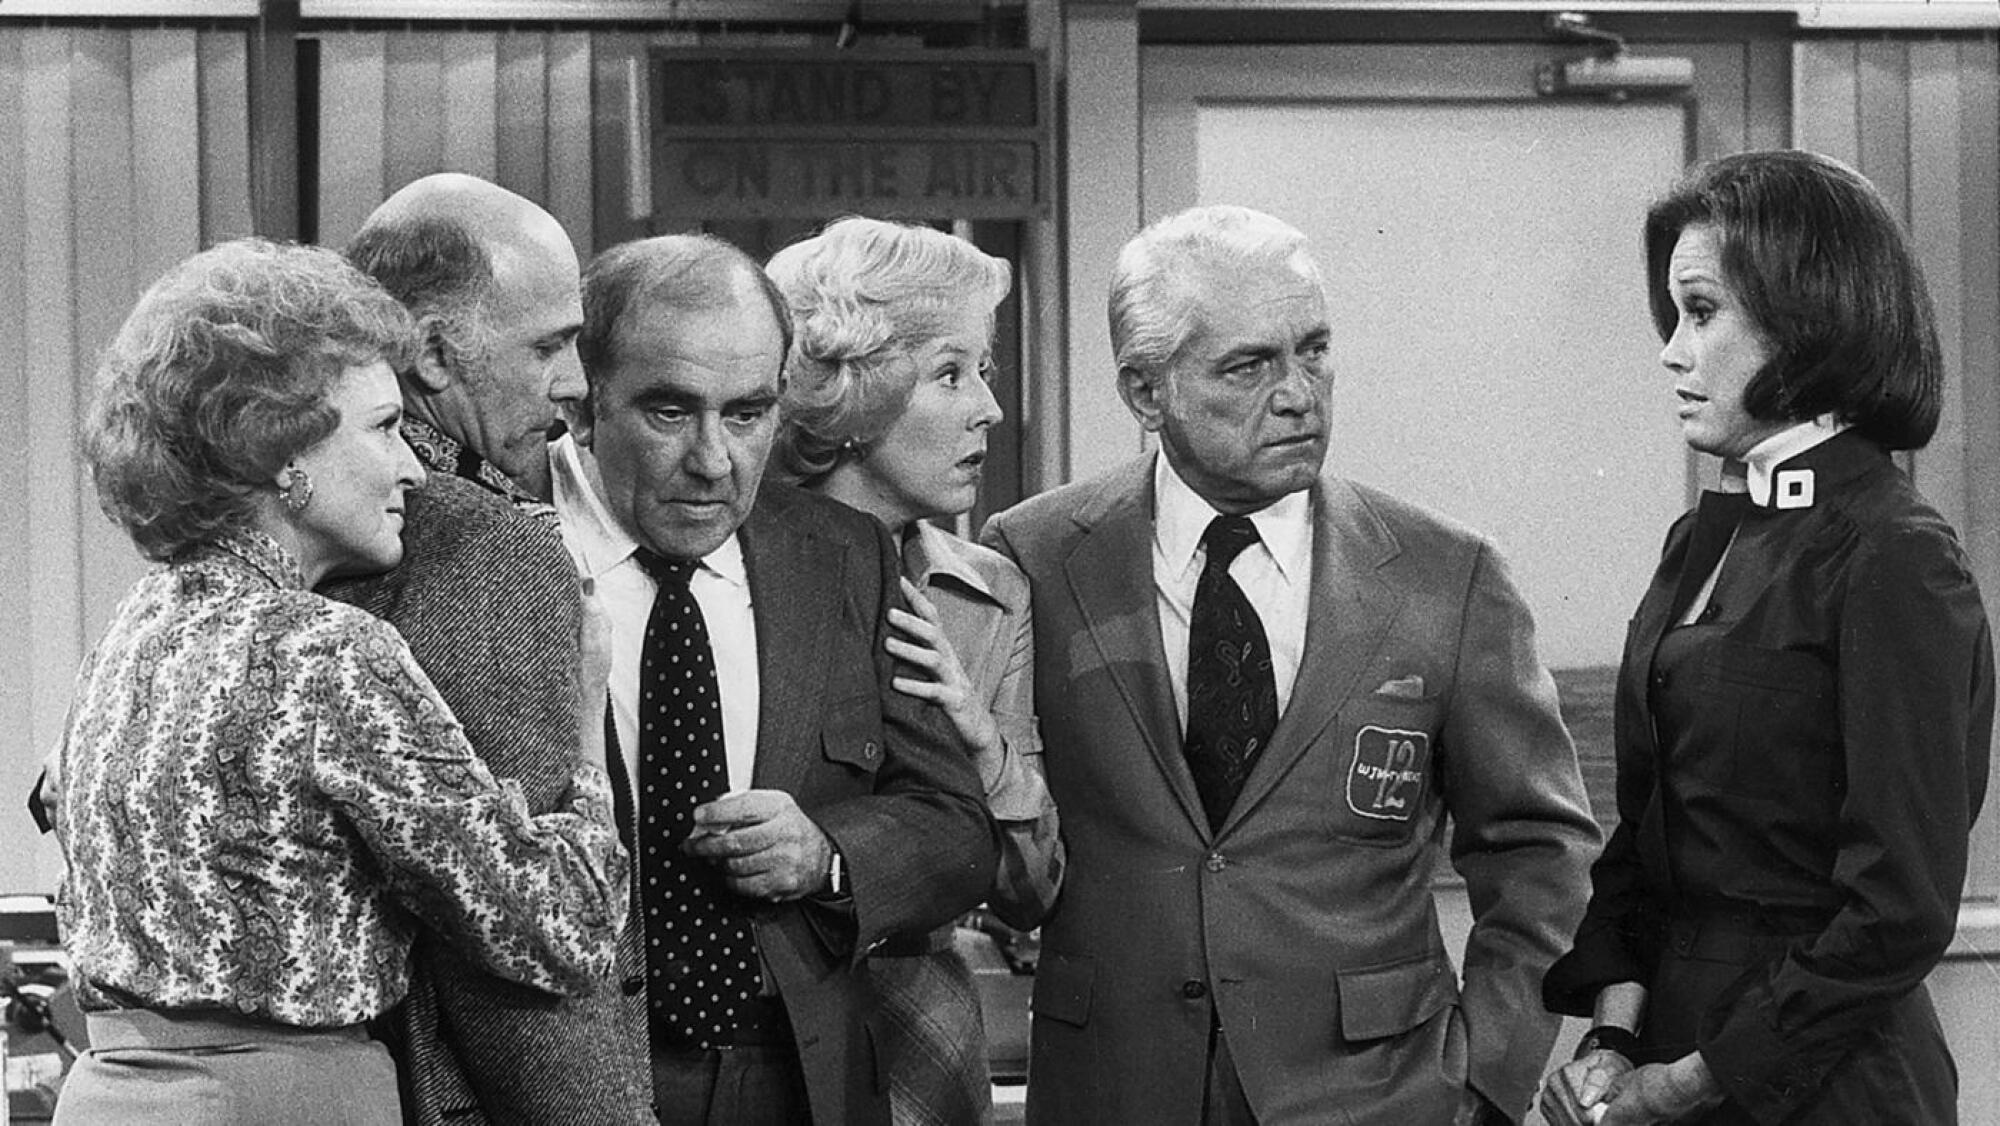 Betty White, Gavin MacLeod, Ed Asner, Georgia Engel, Ted Knight and Mary Tyler Moore in "The Mary Tyler Moore Show."